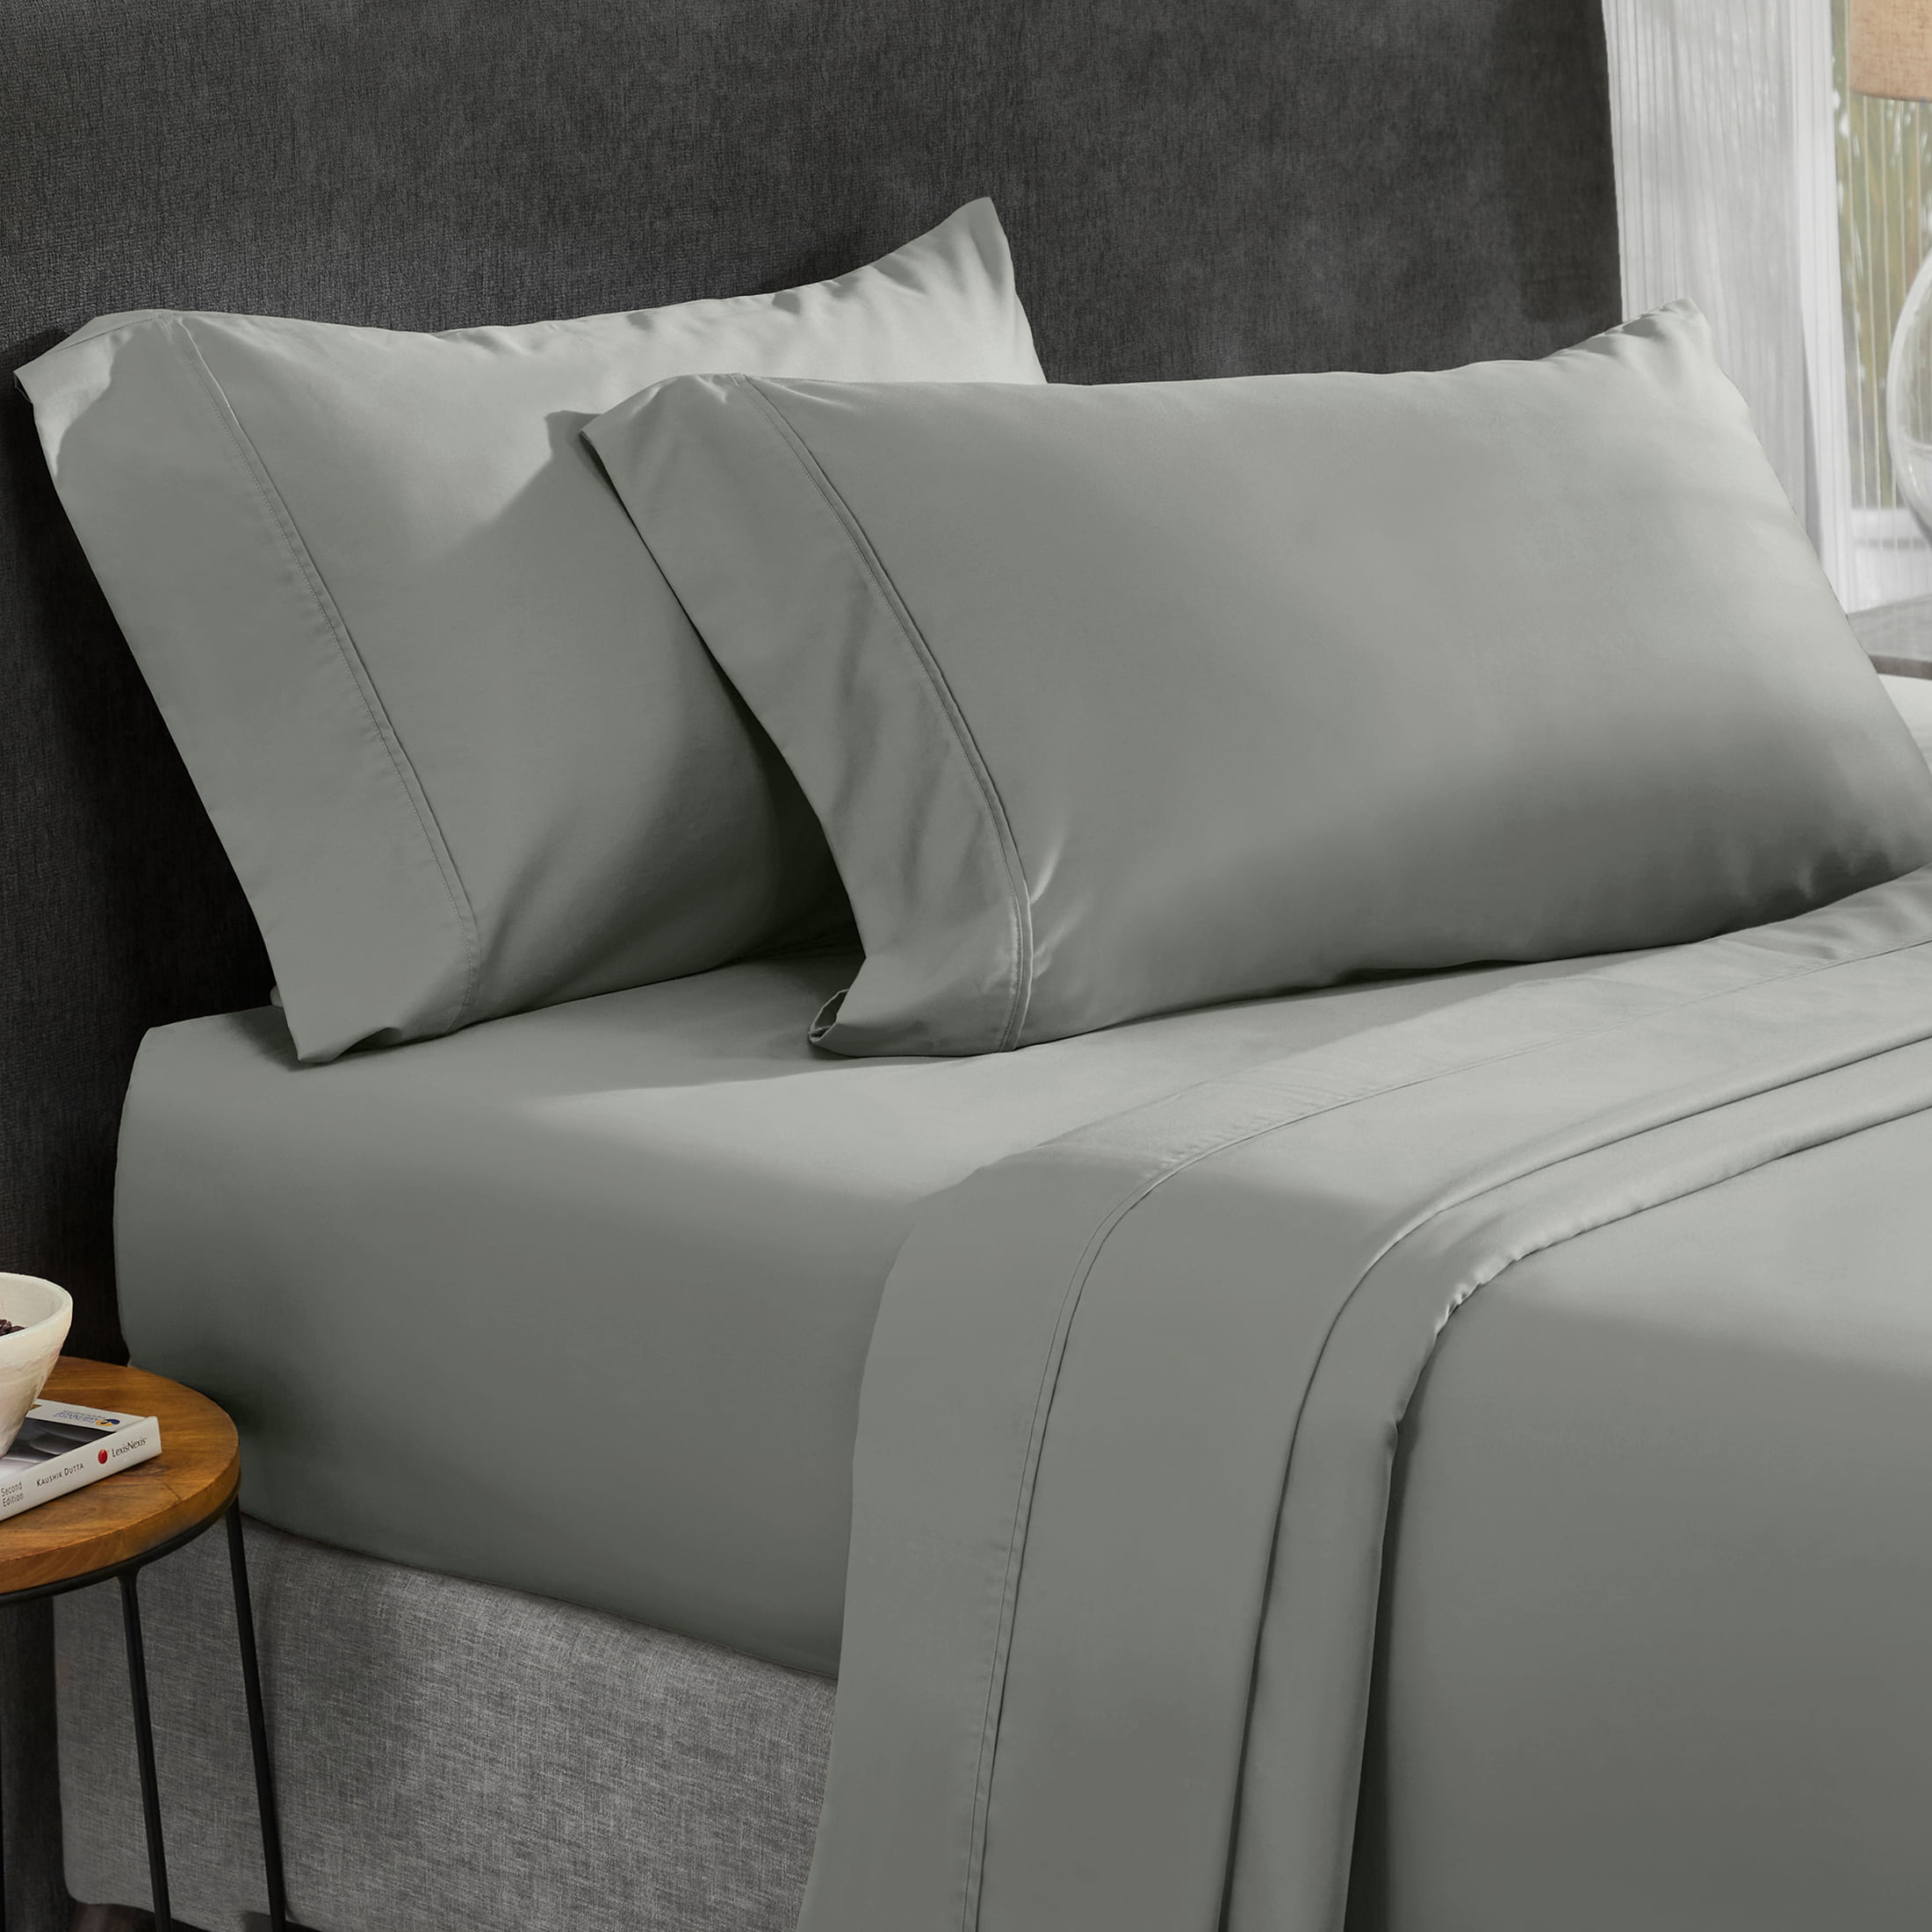 Details about   Casual Living Campus Microfiber California King Sheet Set in Light Grey 